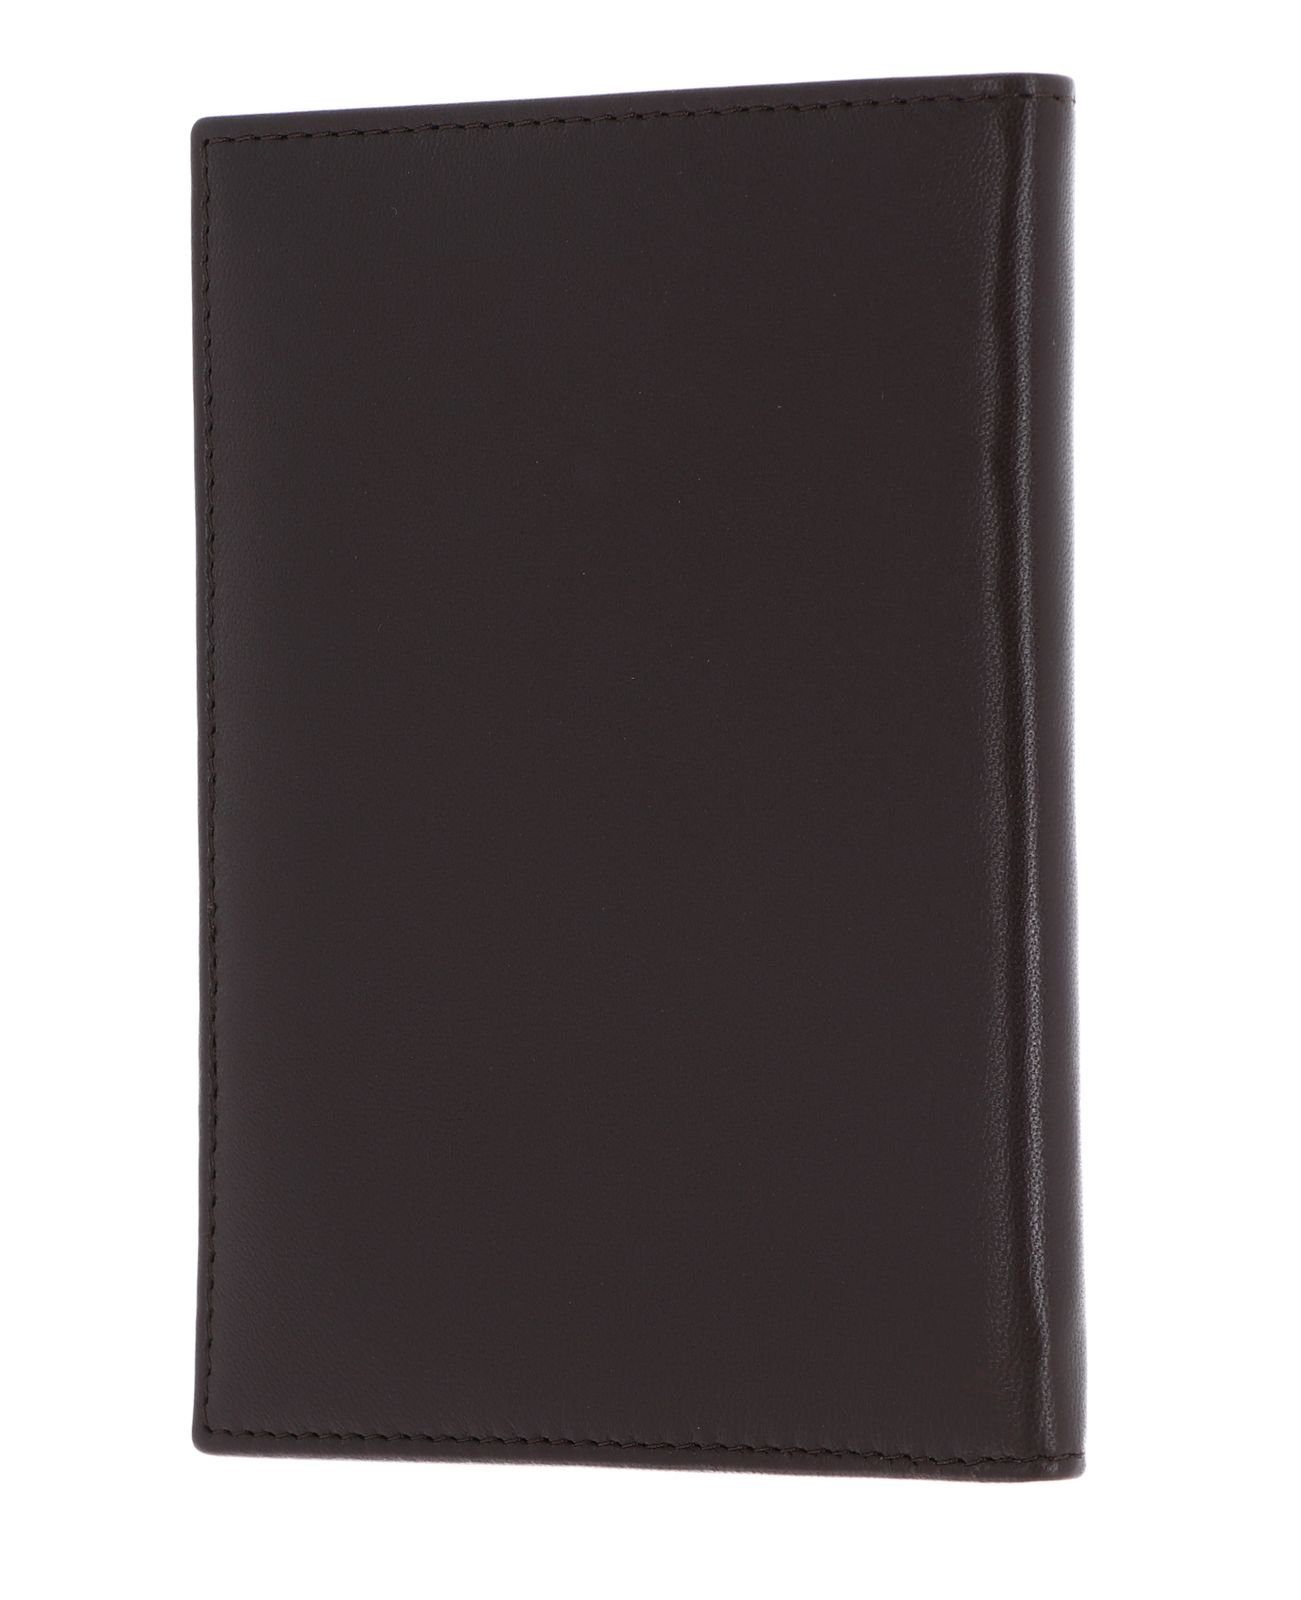 Brown Classic BOSS Smooth Etui